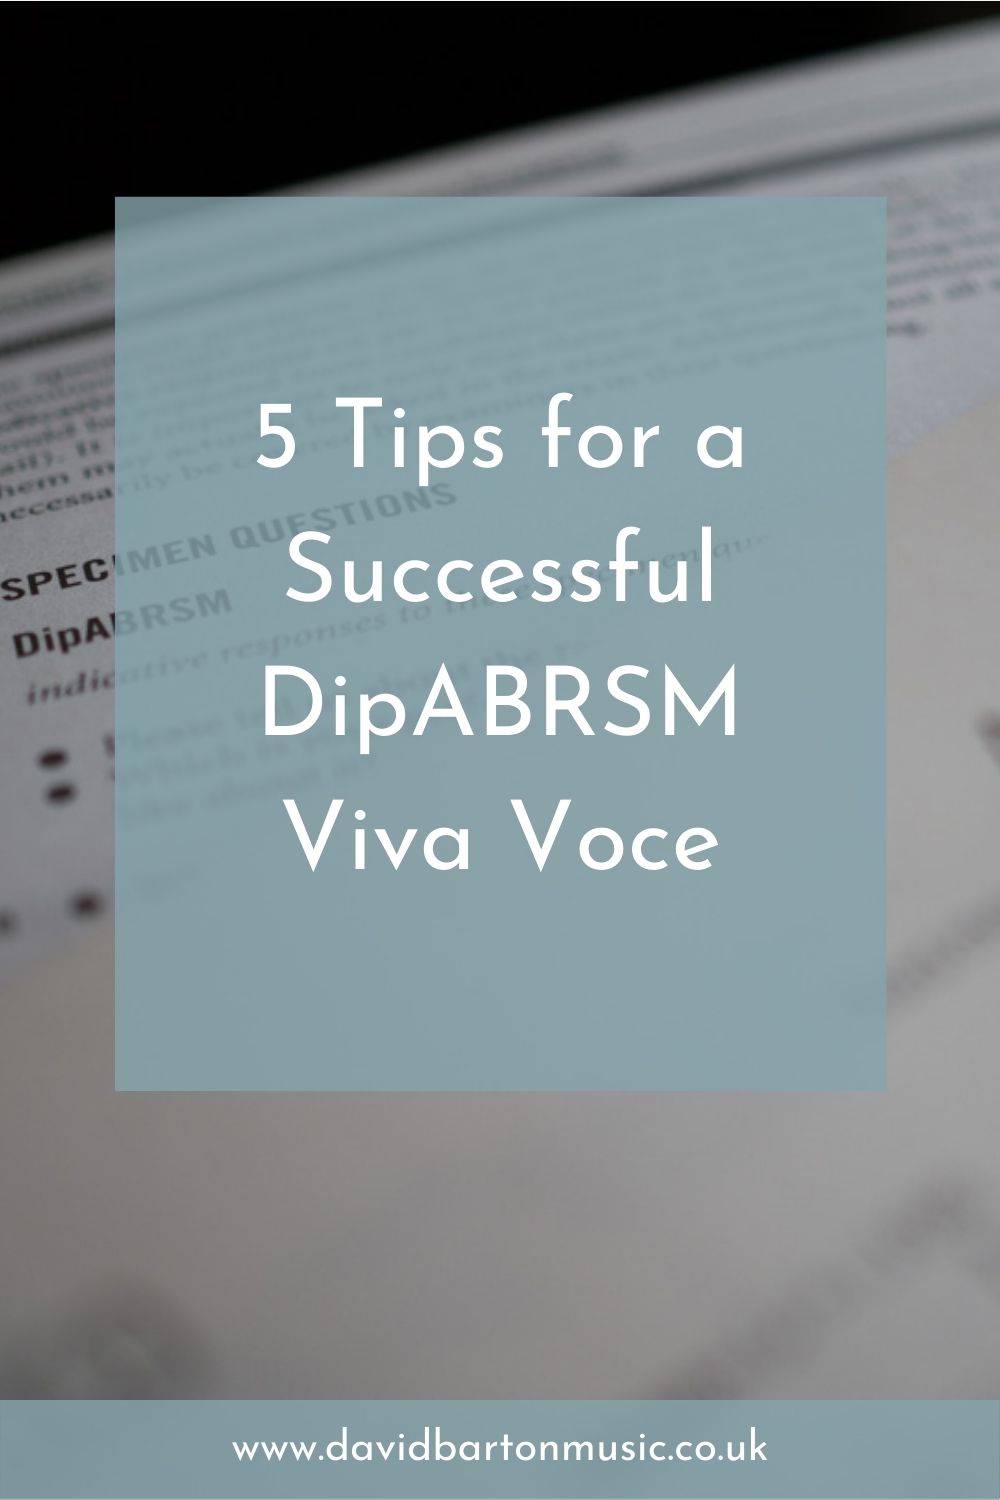 5 Tips for a Successful DipABRSM Viva Voce - Pinterest Graphic